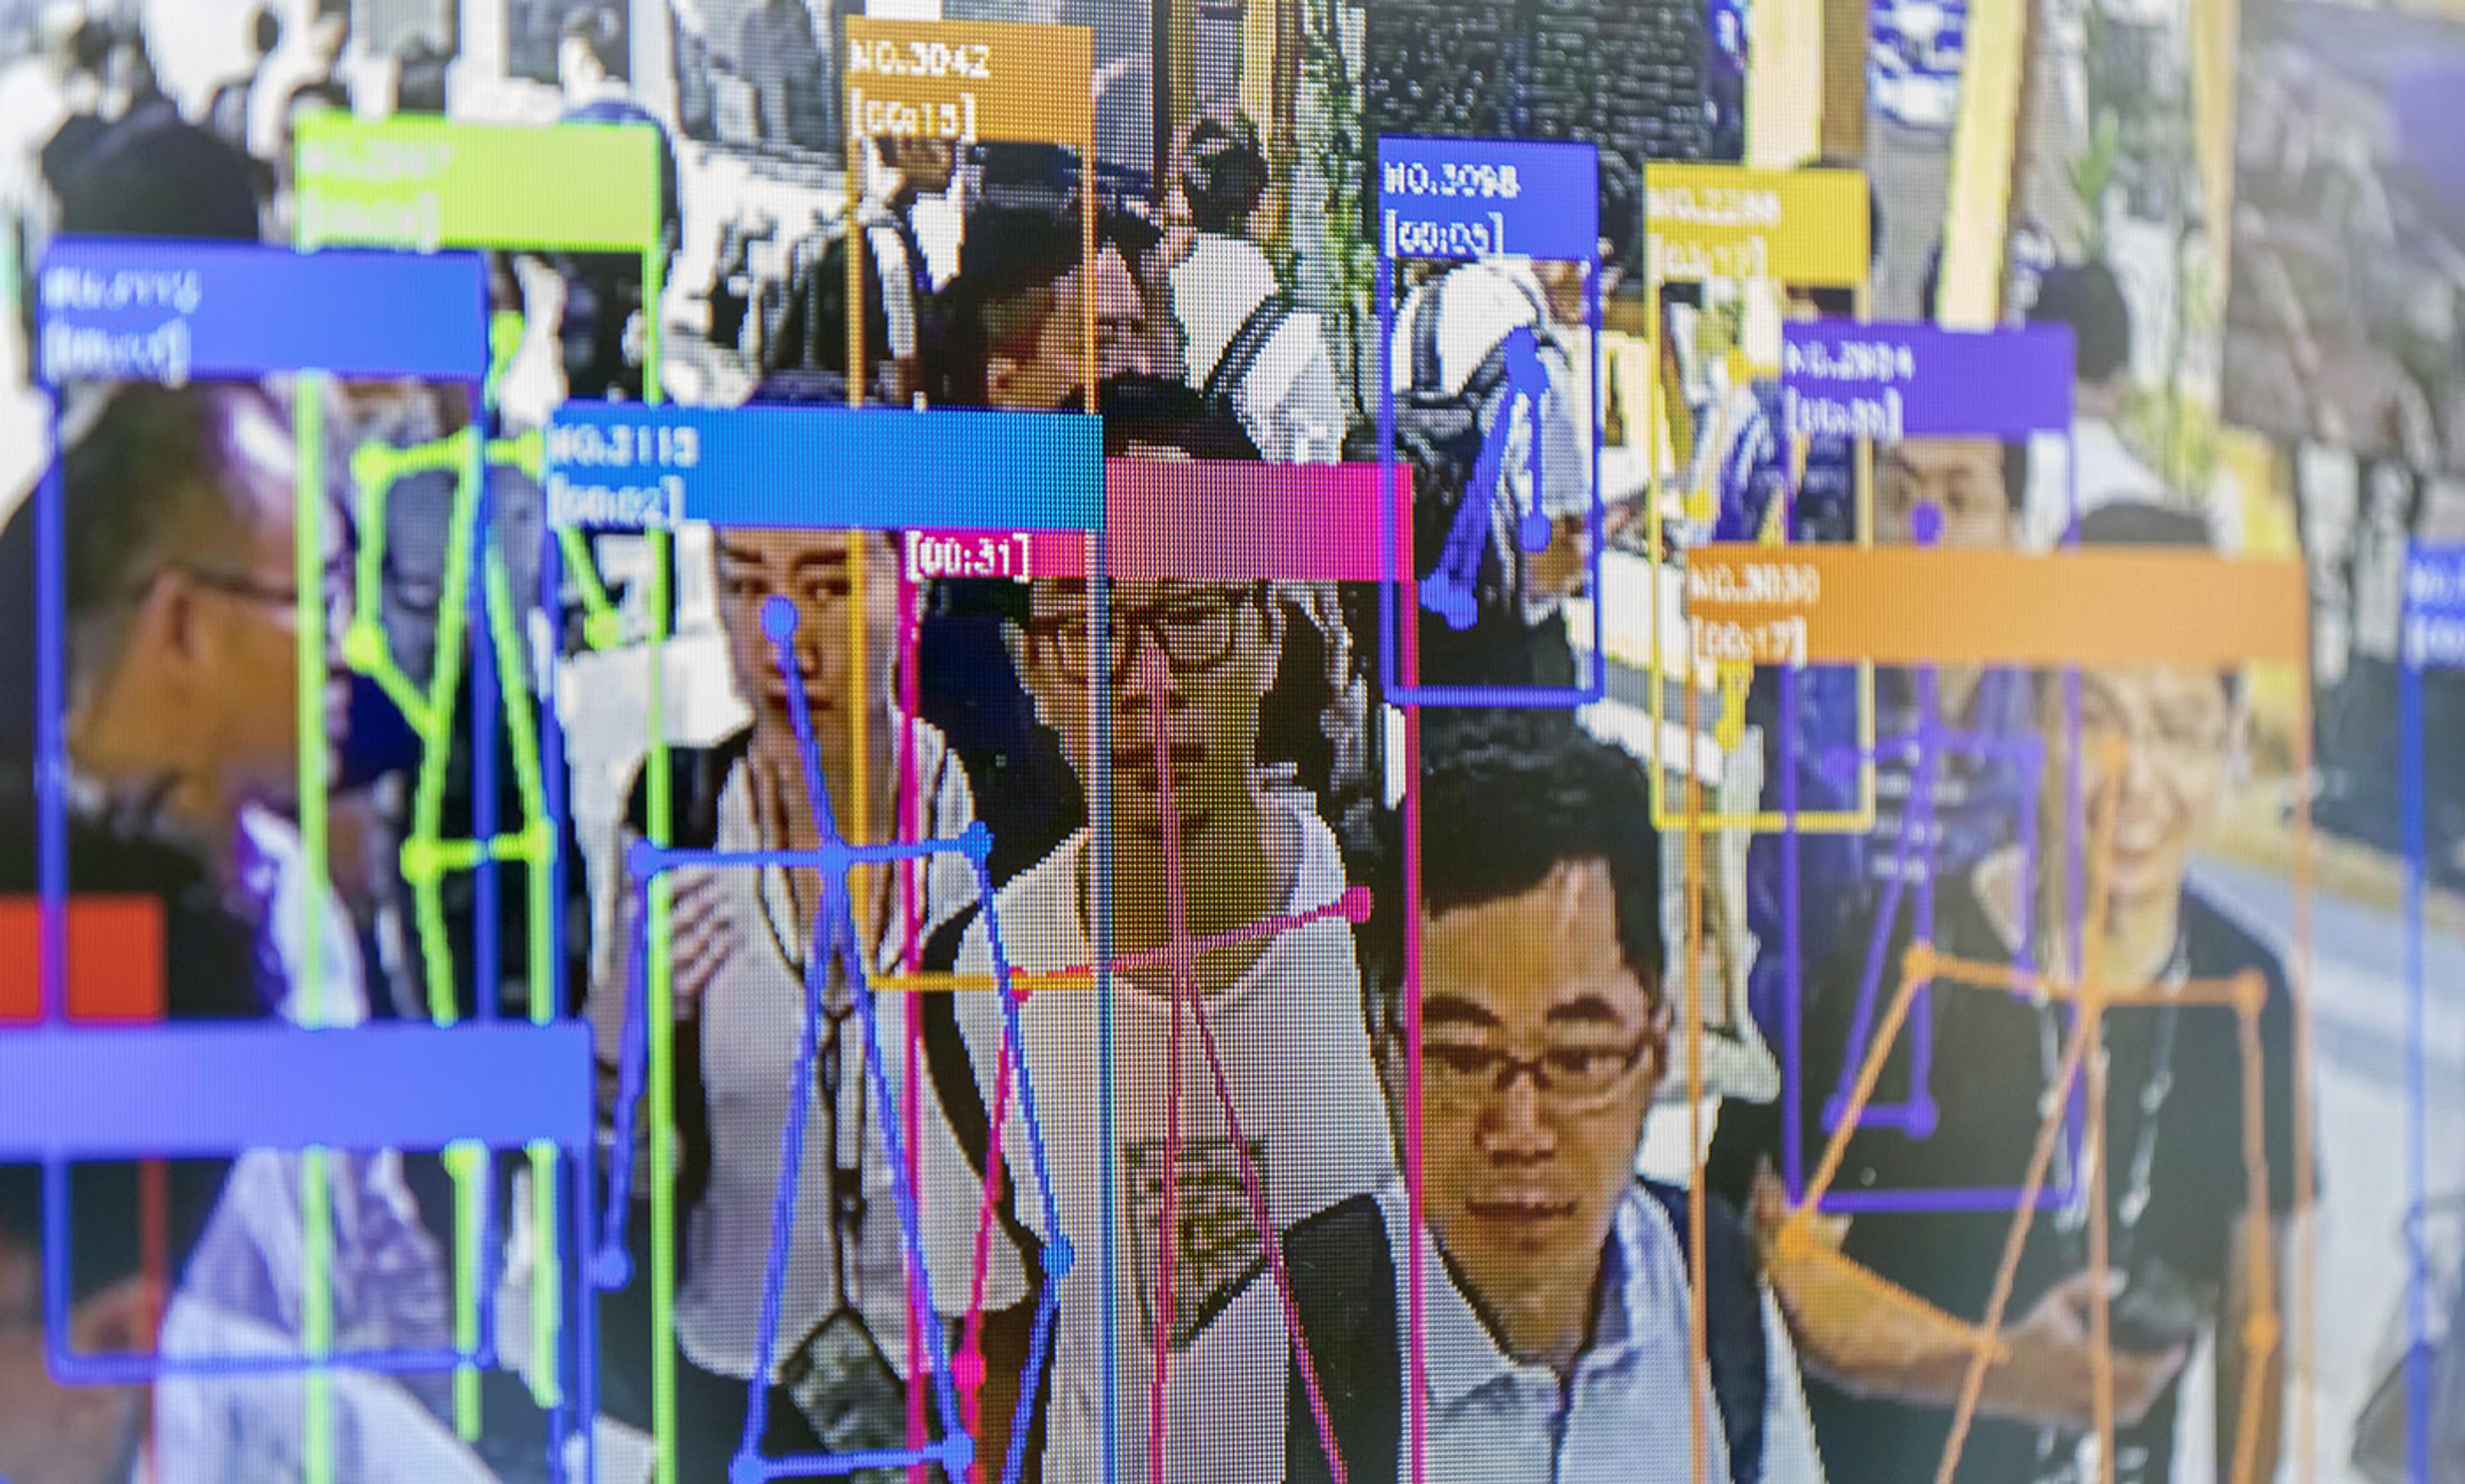 <p>A screen demonstrates facial-recognition technology at the World Artificial Intelligence Conference (WAIC) in Shanghai, China, on Thursday 29 August 2019. <em>Photo by Qilai Shen/Bloomberg via Getty Images</em></p>